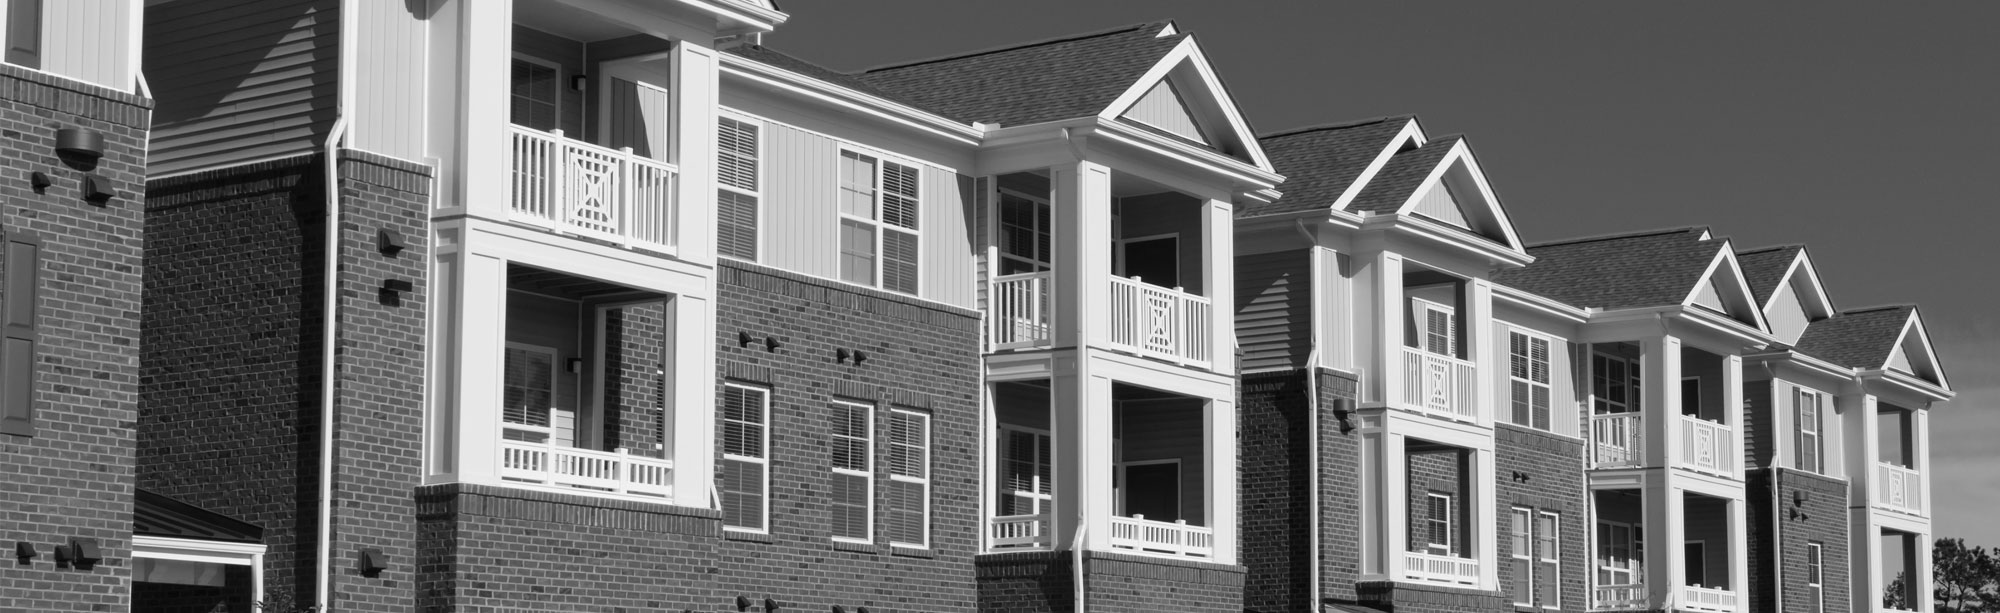 Triad Multi-Family Property Management